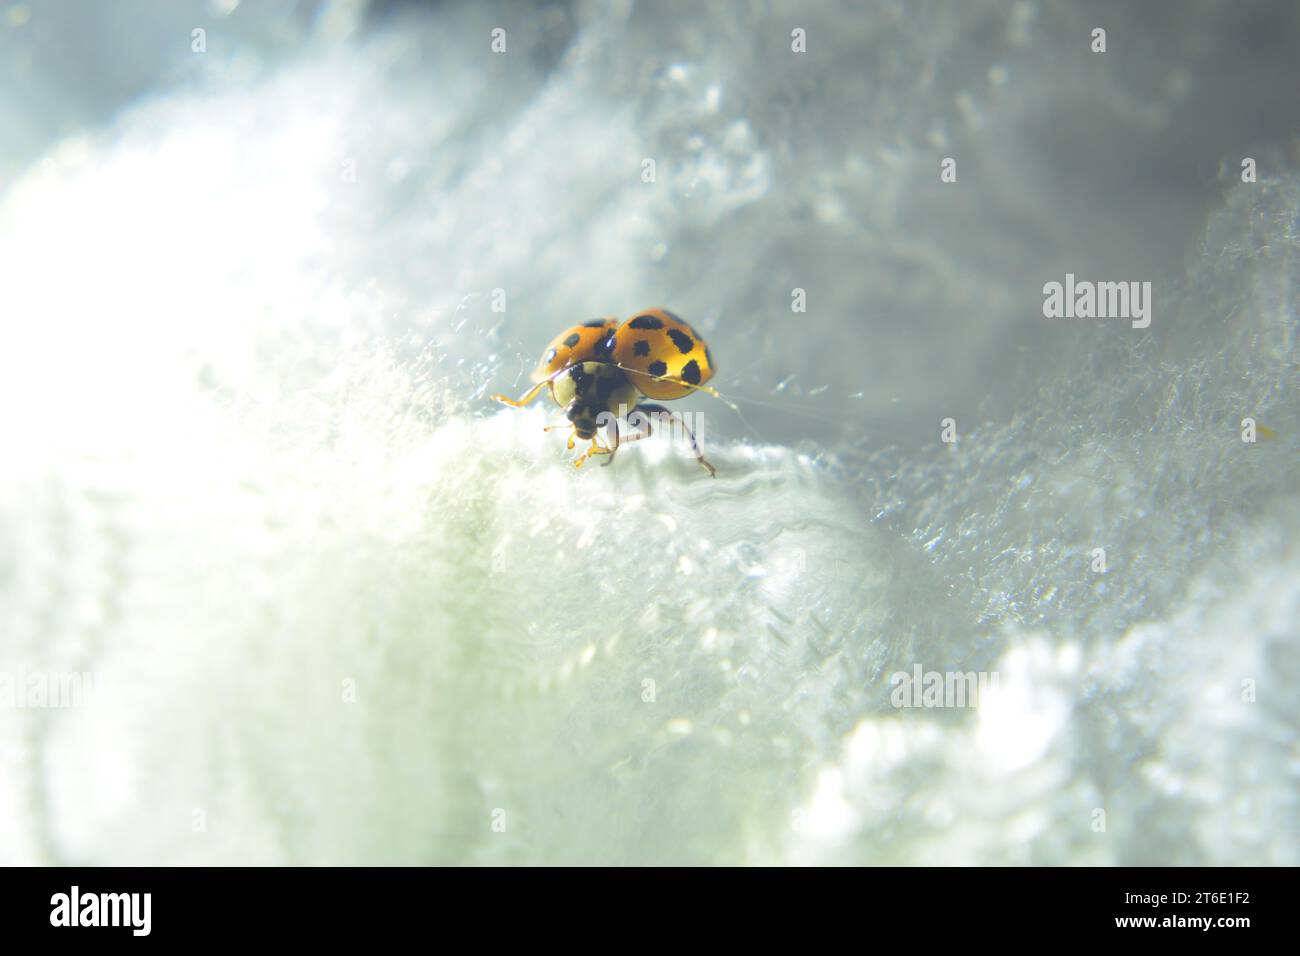 Close-up of a ladybird (ladybug) crawling over a mound of cotton resembling a fluffy white cloud, as it opens its wings preparing to fly. Stock Photo